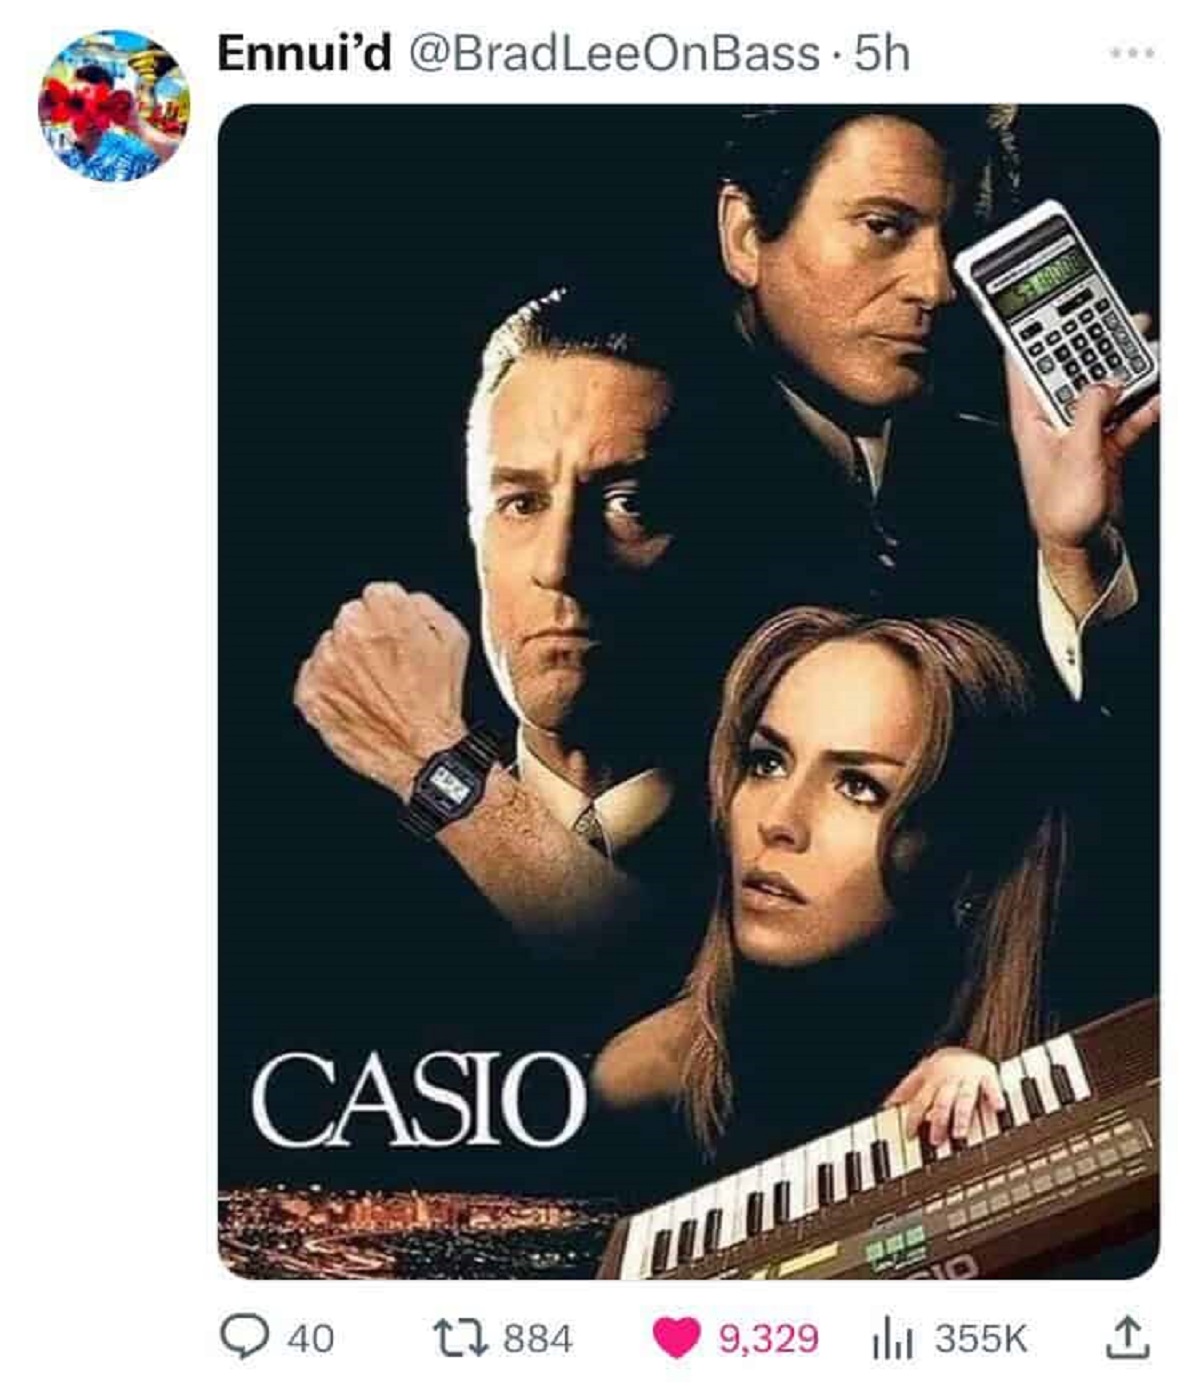 casino movie poster - Ennui'd Lee On Bass 5h Casio 40 884 9, Checko